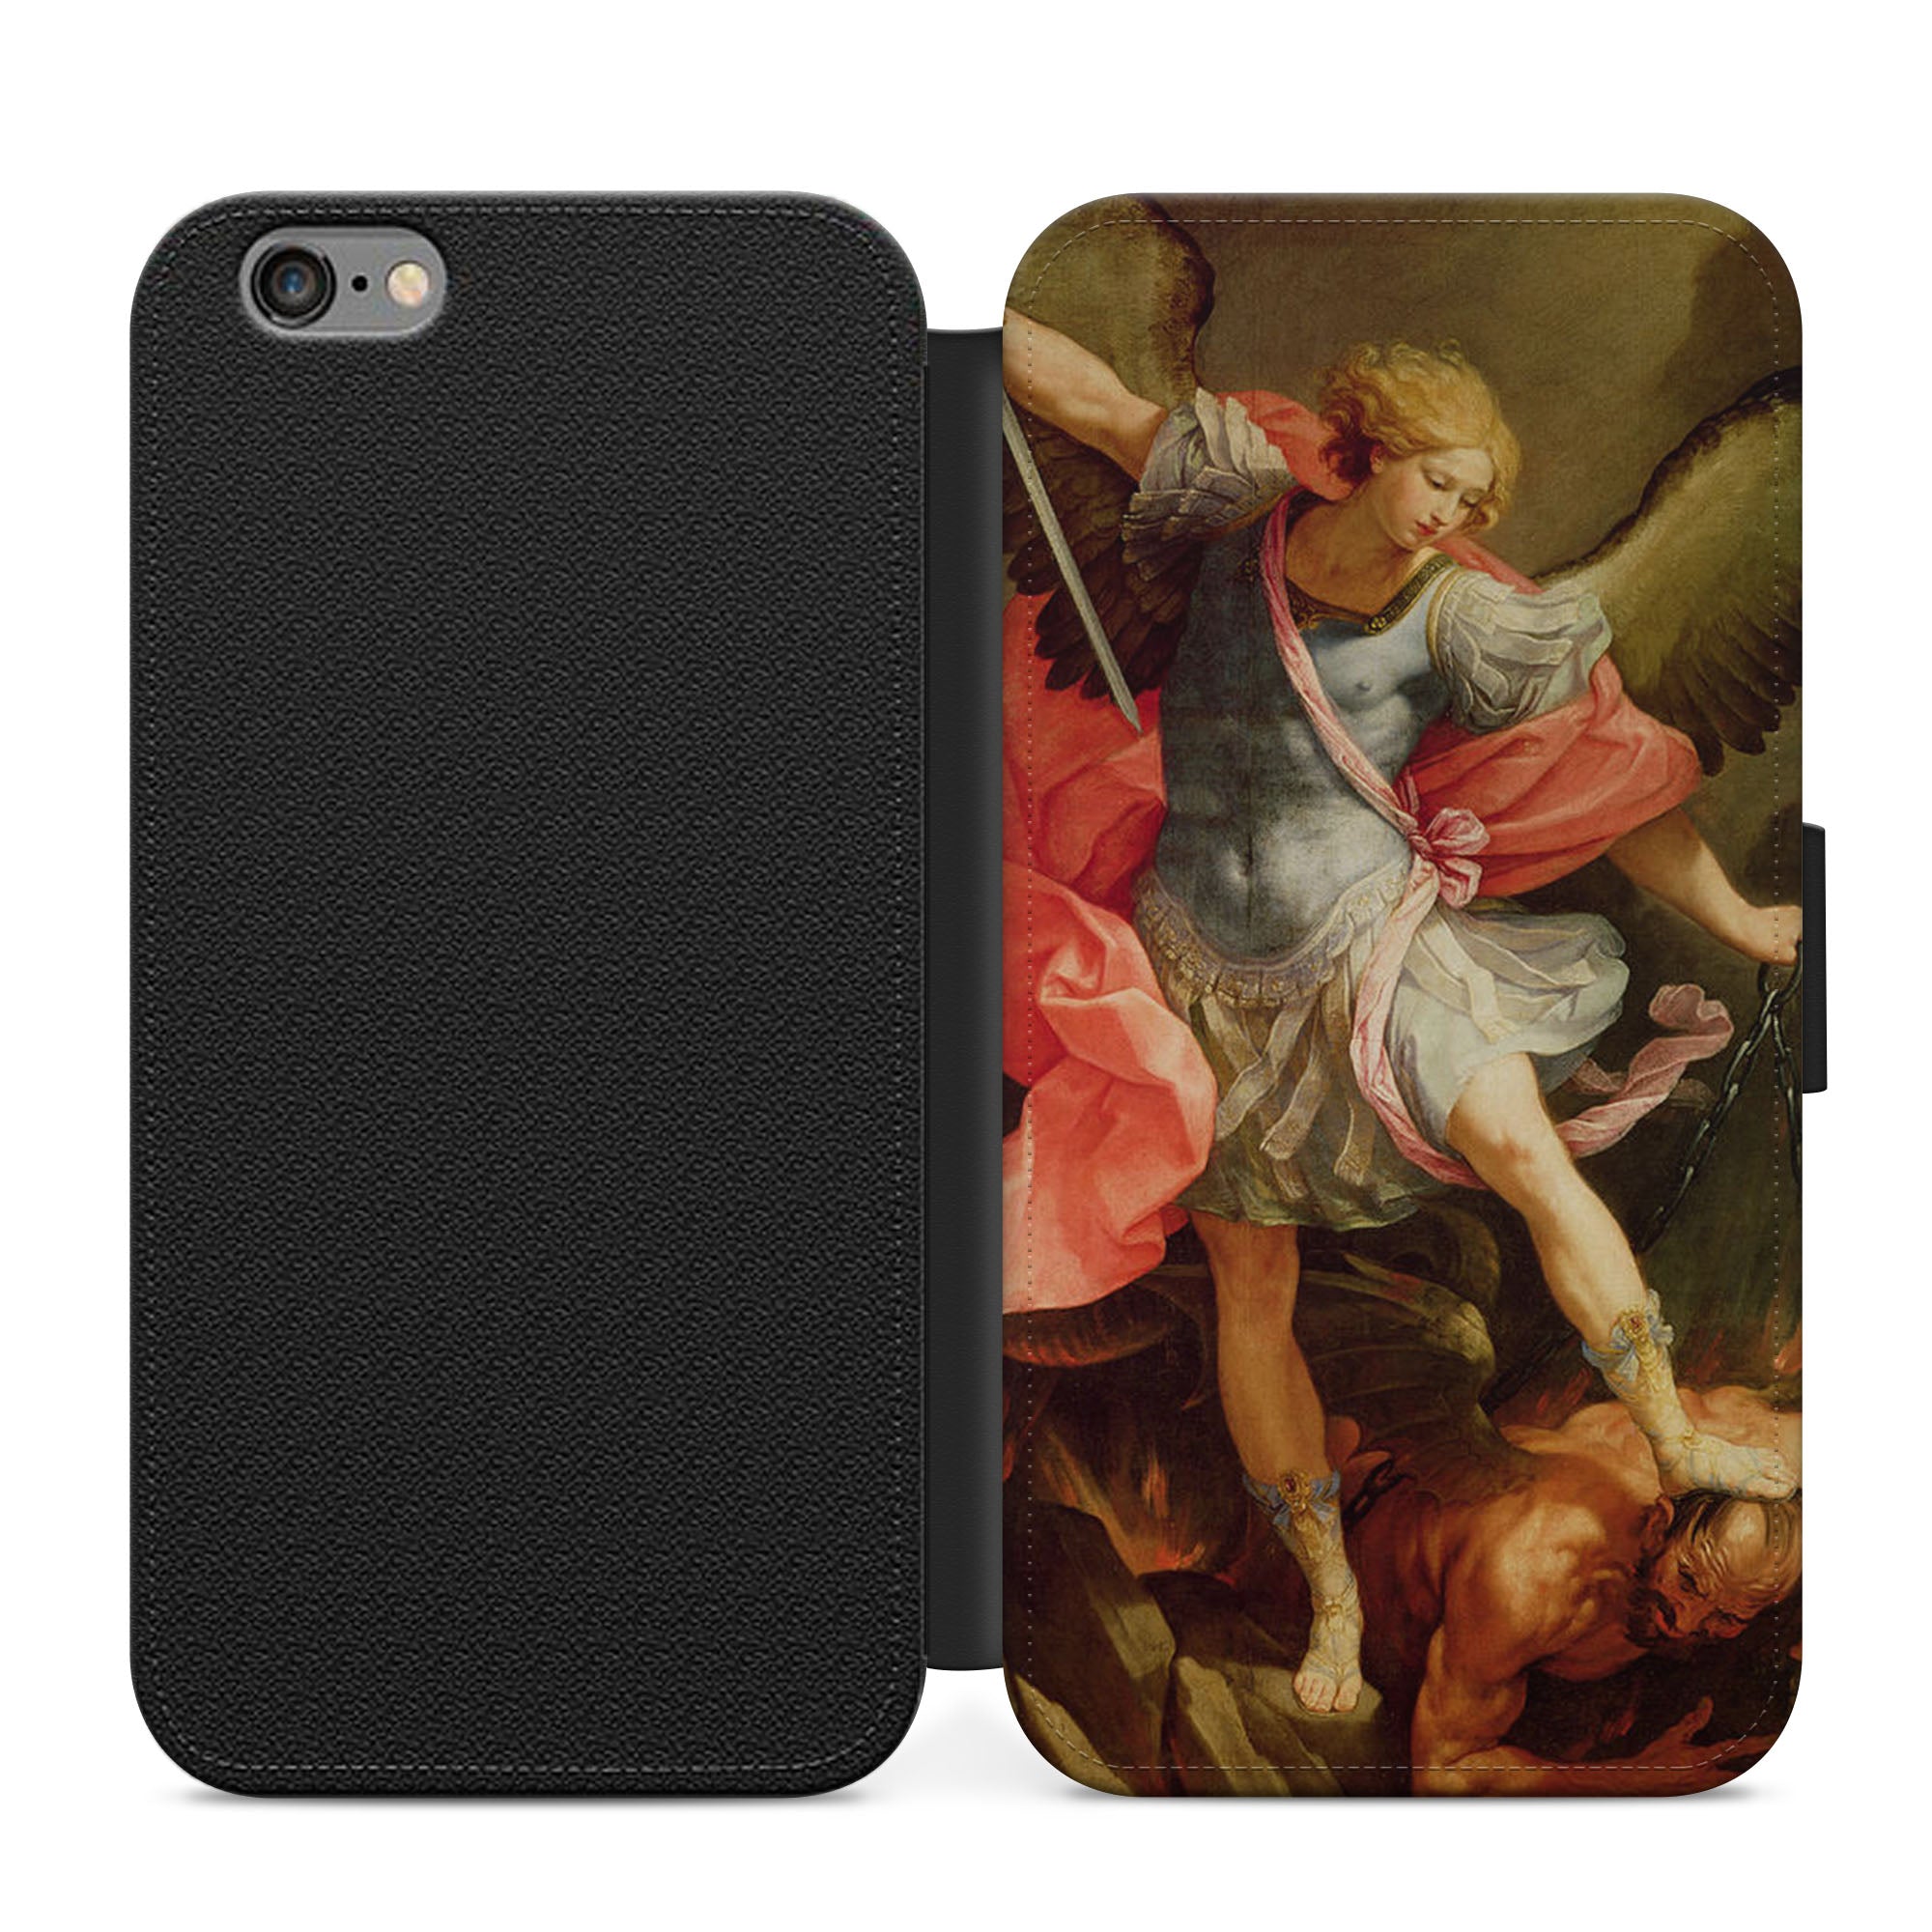 St. Michael The Archangel Faux Leather Flip Case Wallet for iPhone / Samsung